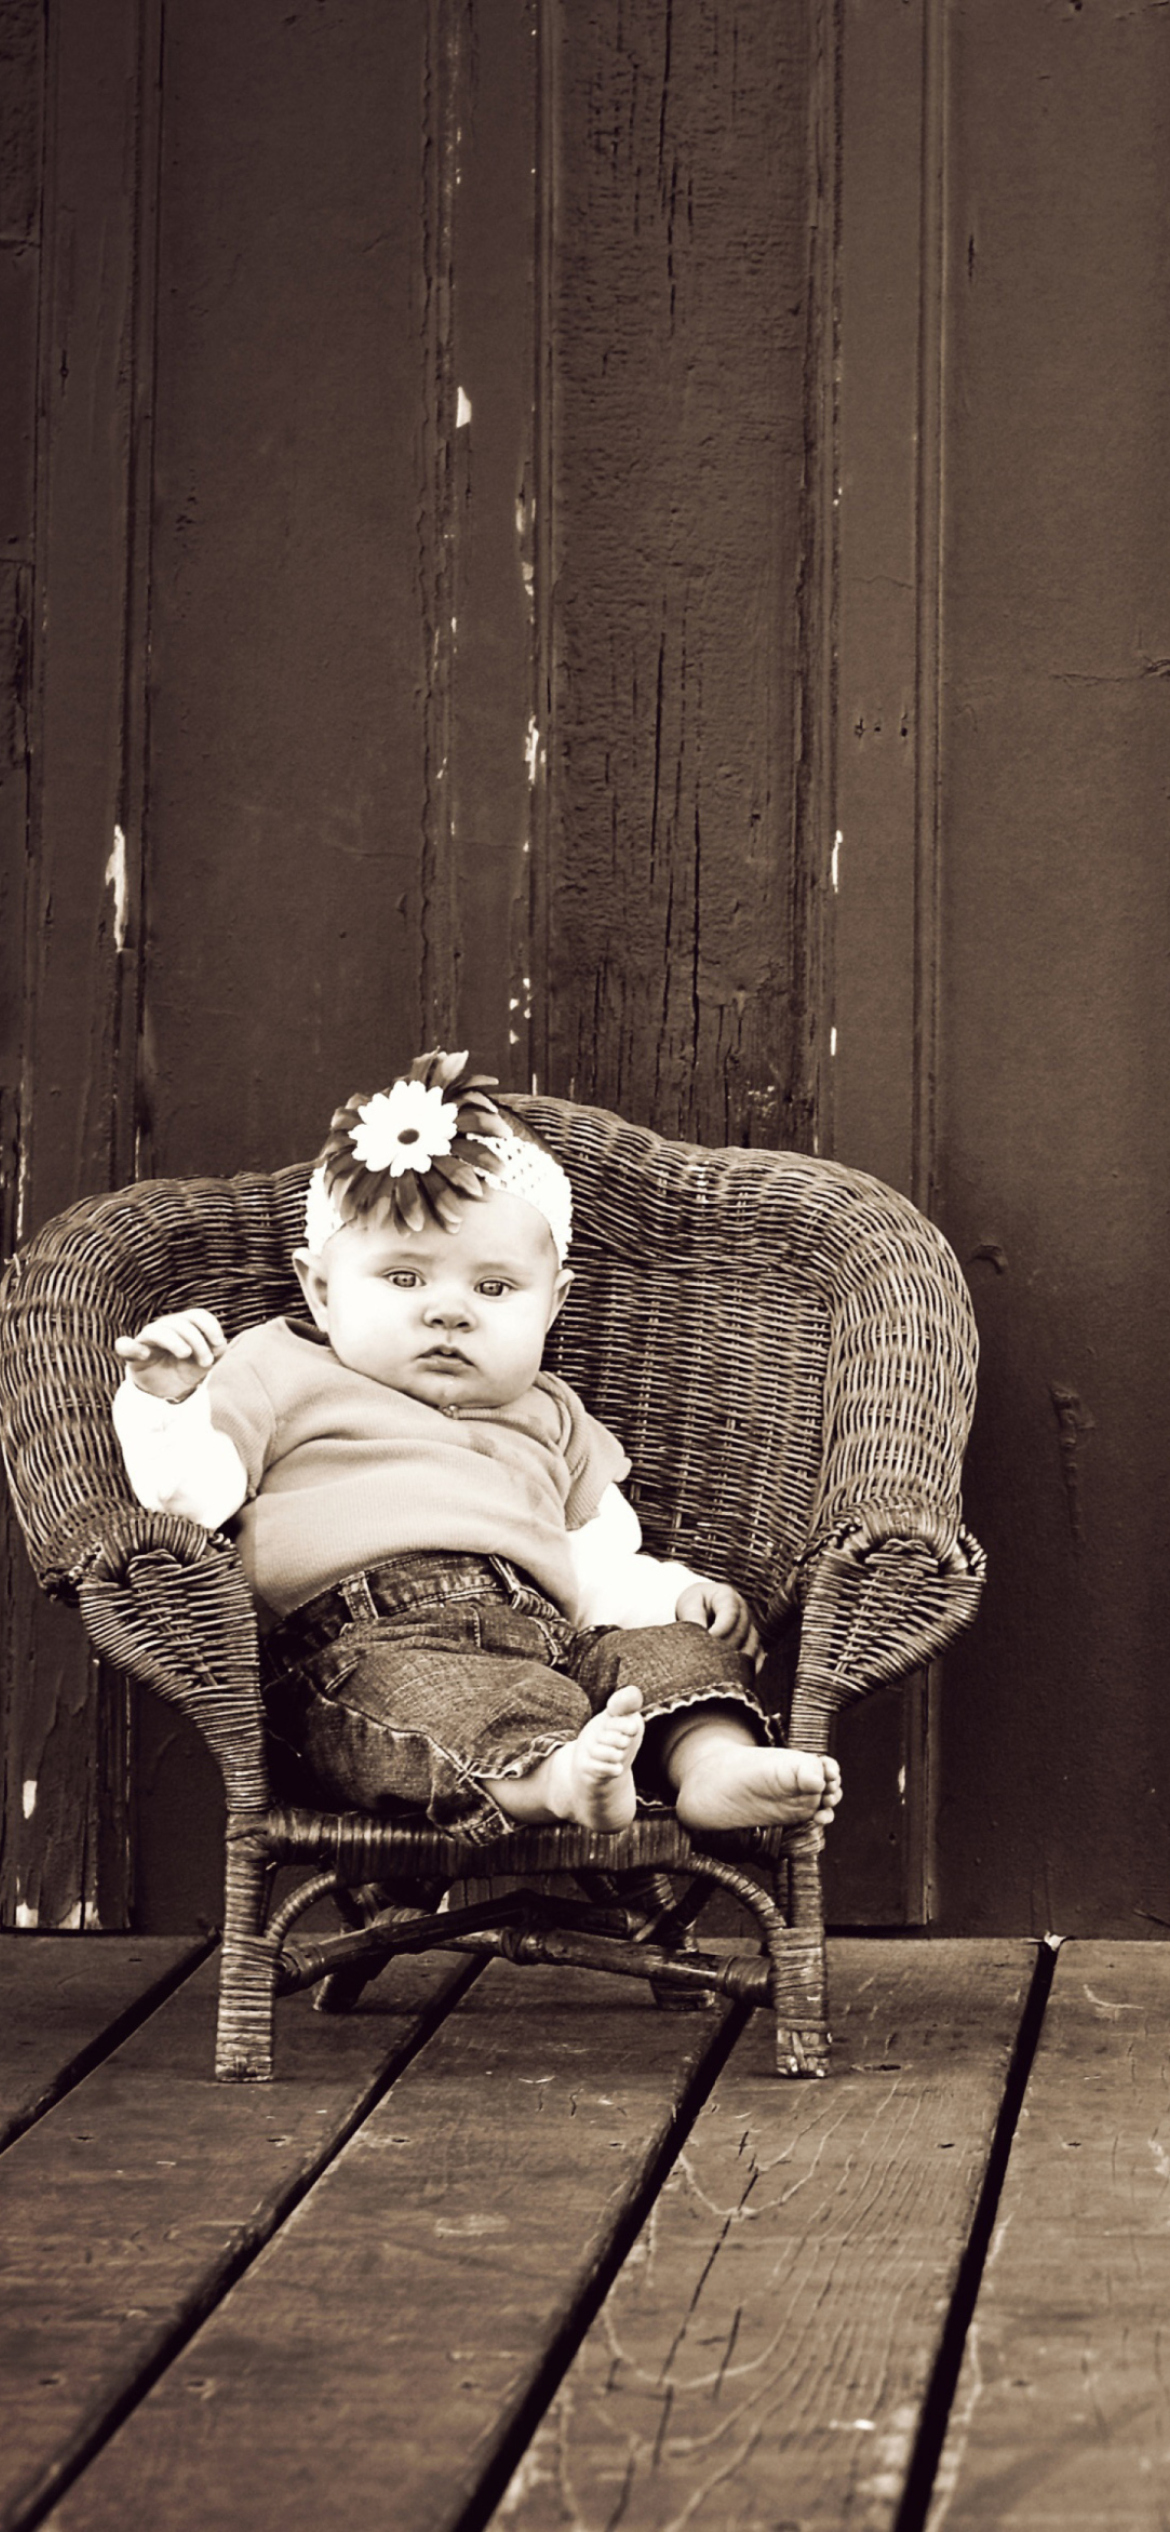 Cute Baby Vintage Style wallpaper 1170x2532